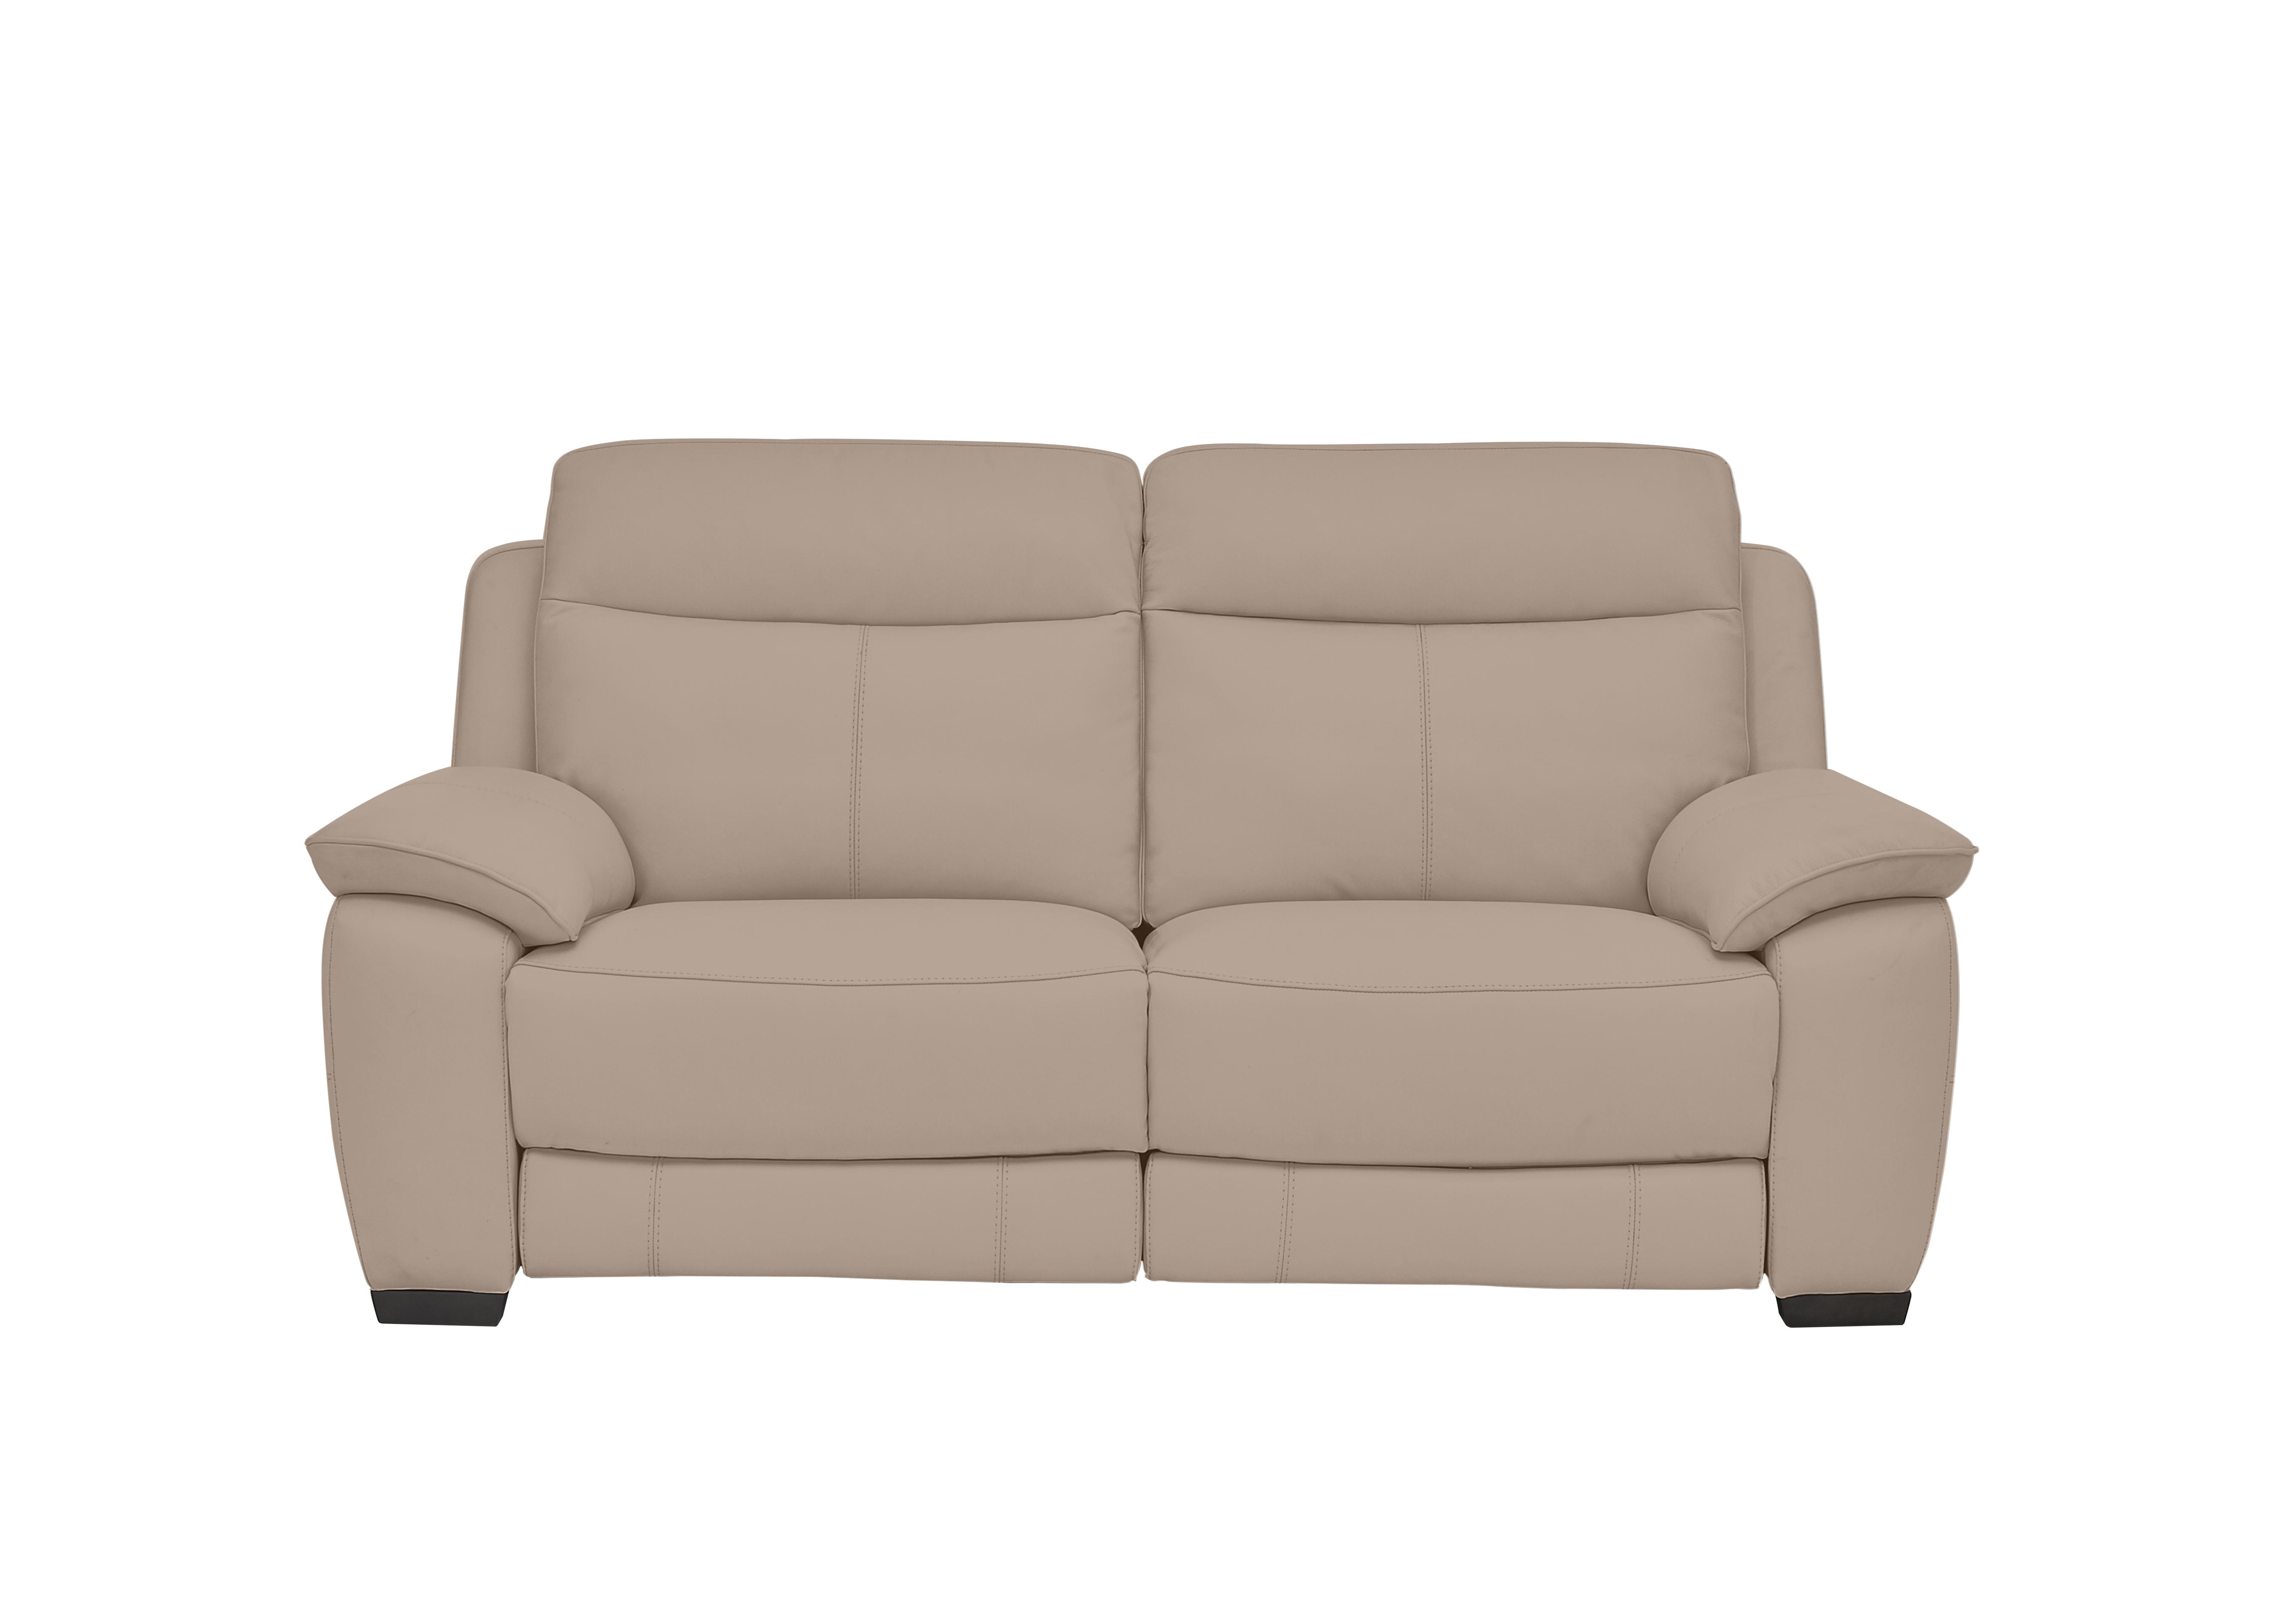 Starlight Express 2 Seater Leather Sofa in Bv-039c Pebble on Furniture Village